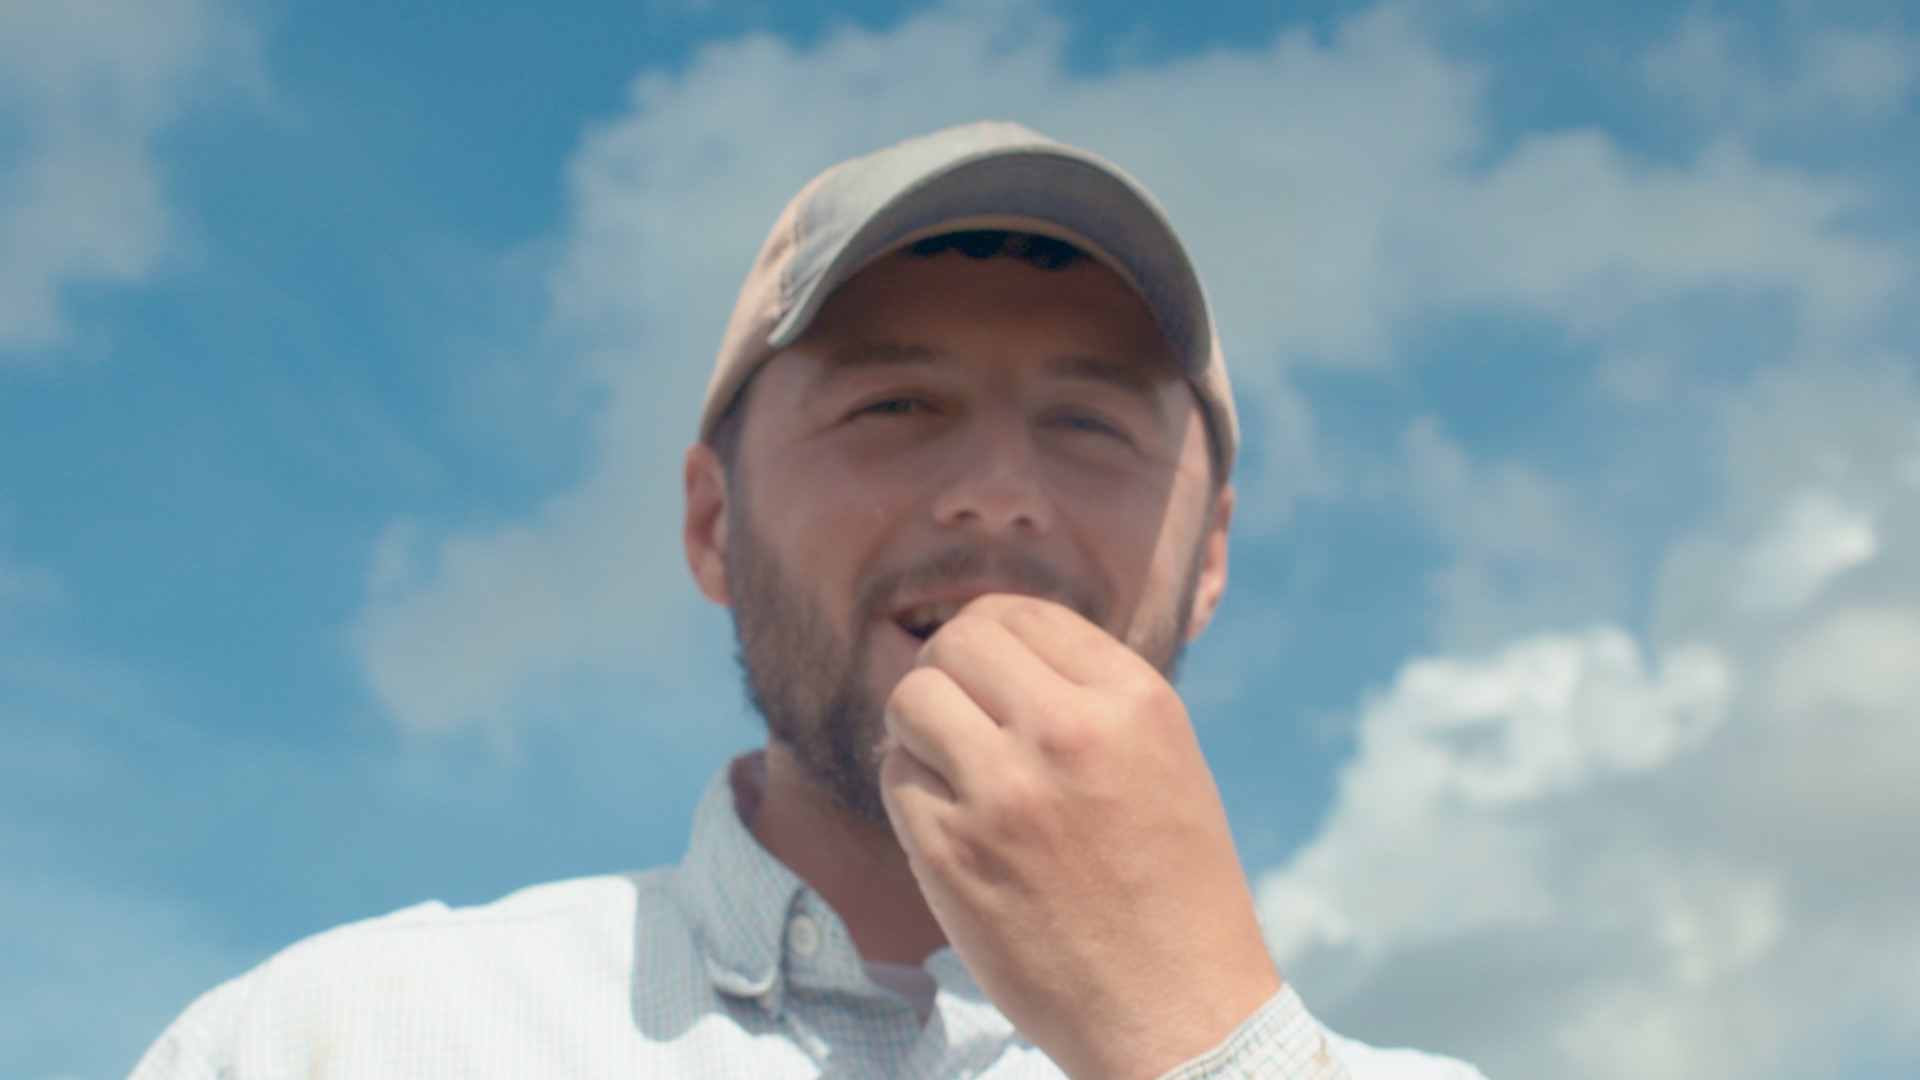 A fourth-generation farmer, Tyler Froberg has found a path to share his passion with the community, while blending his experiences as a veteran and an educator.